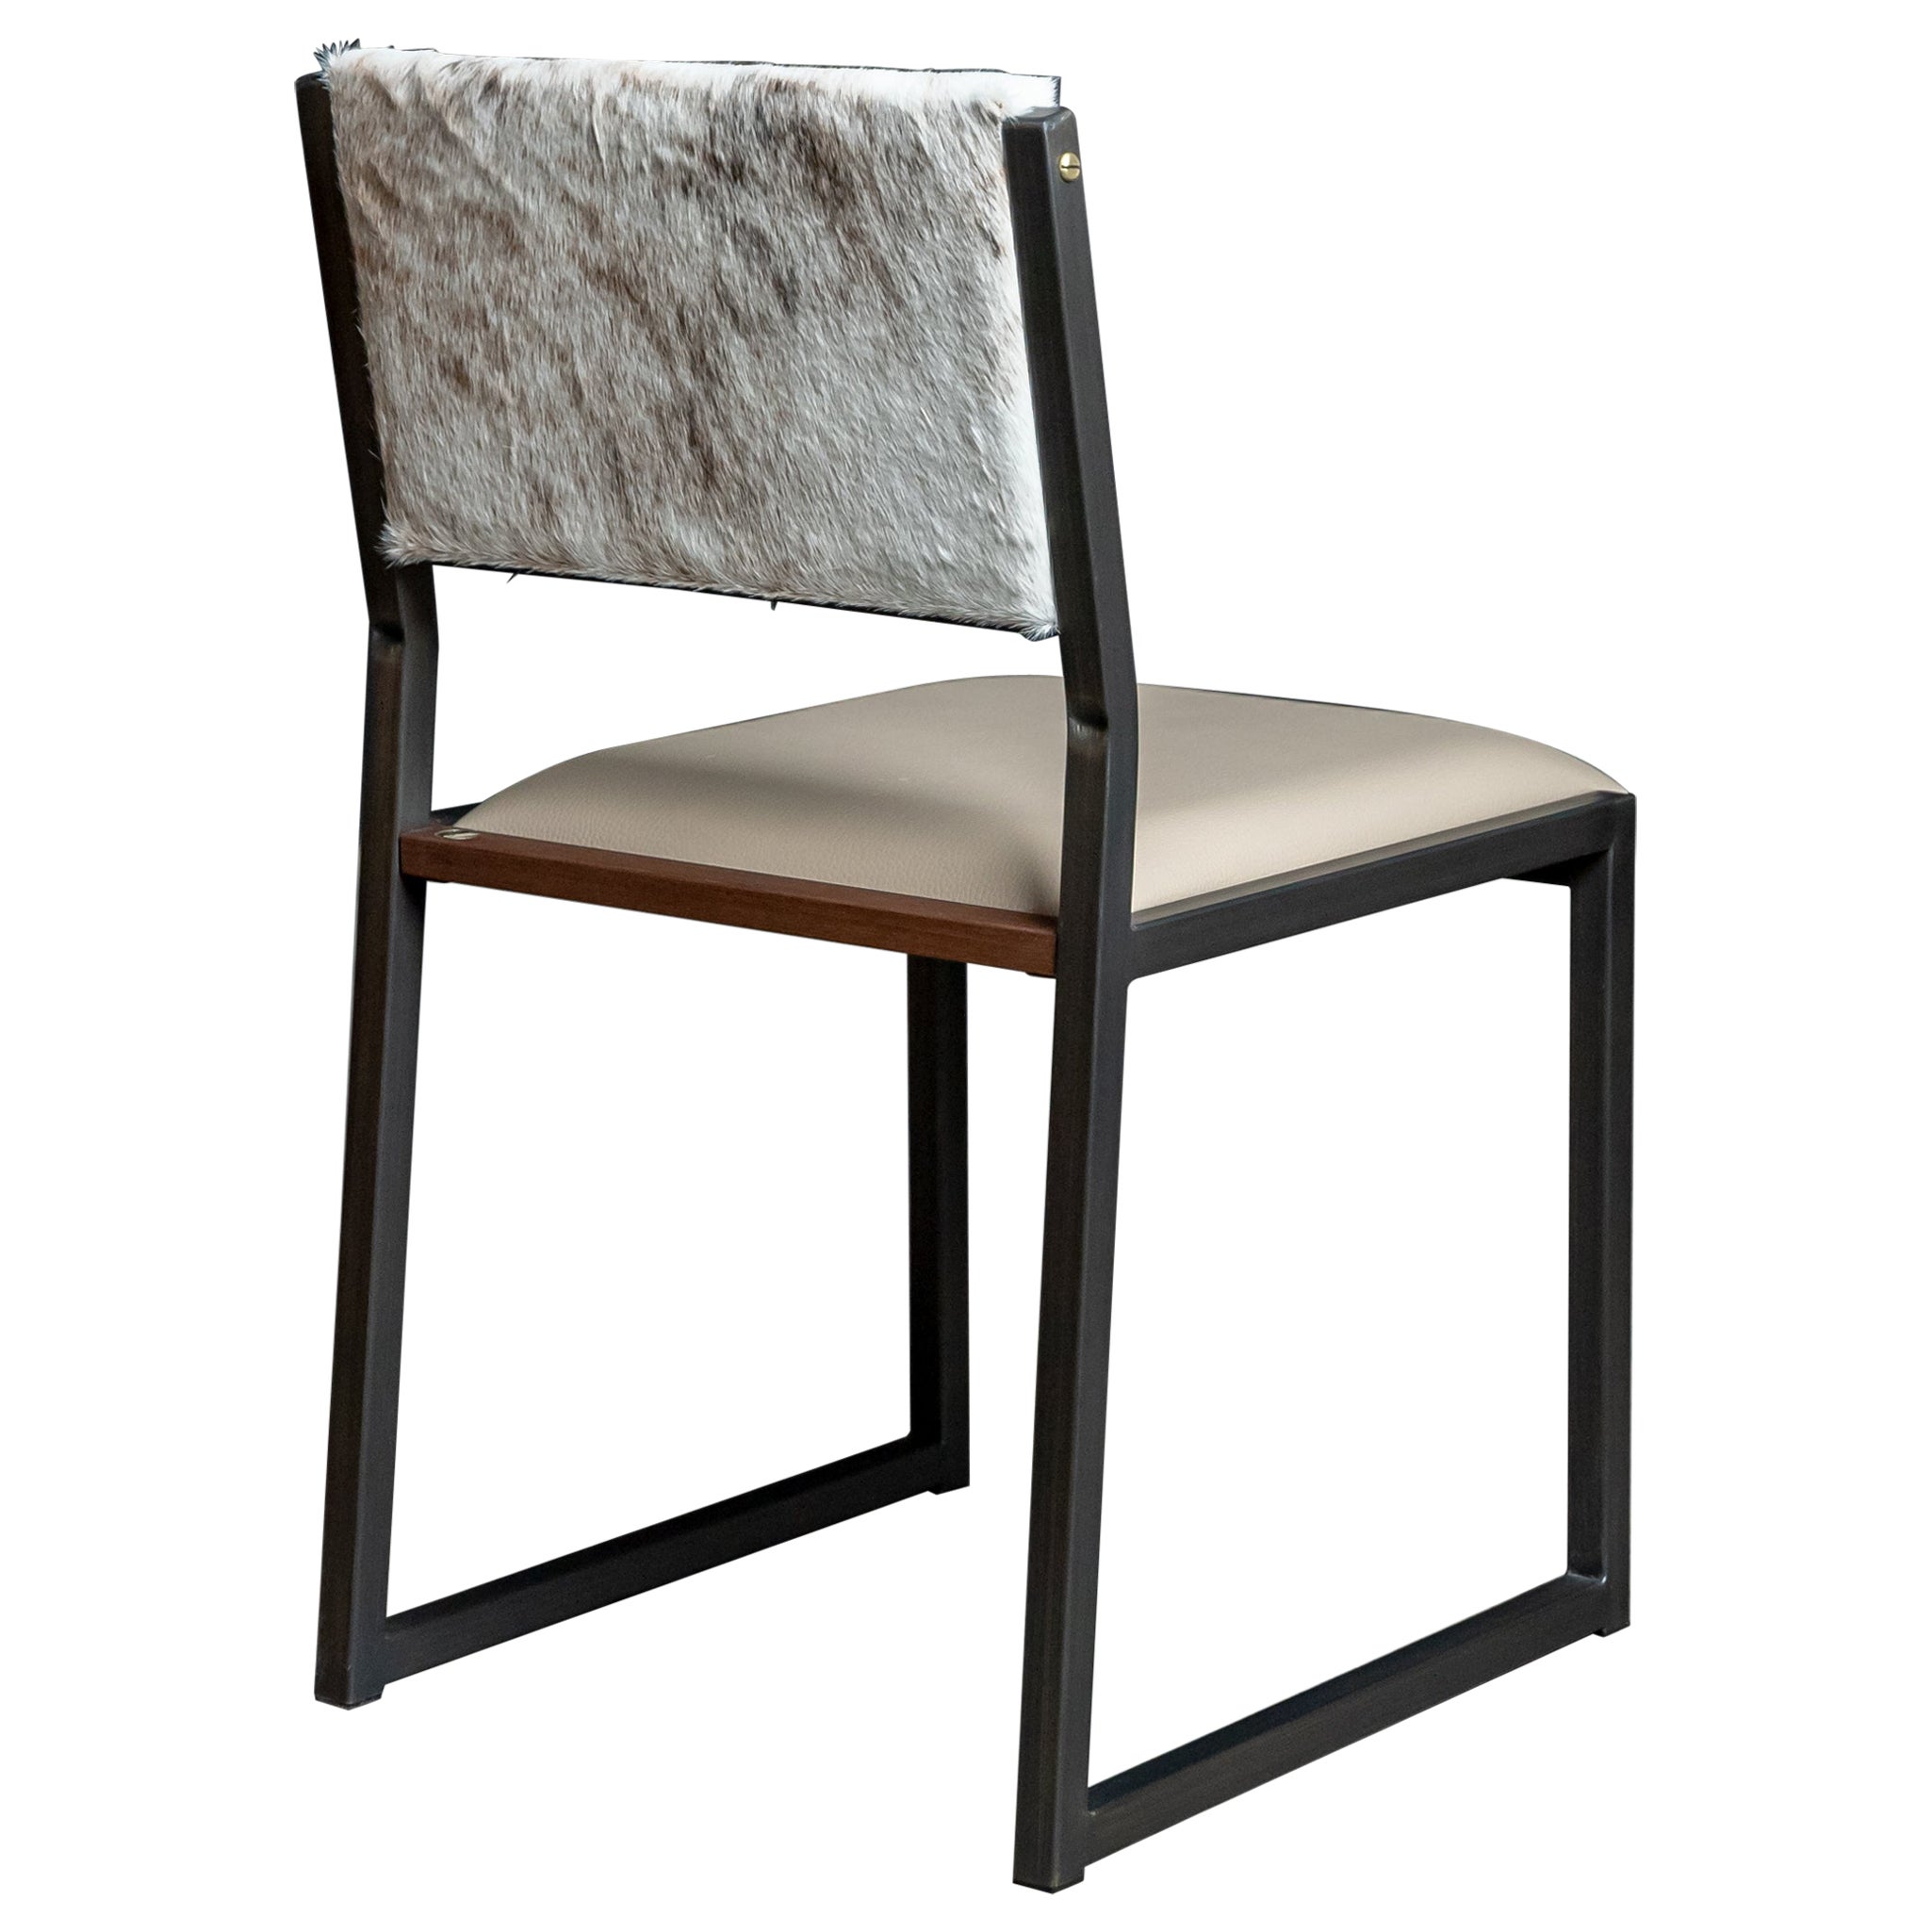 Shaker Modern Chair, Brushed Bronze, Walnut, Sand Leather, Light Brindle Cowhide For Sale